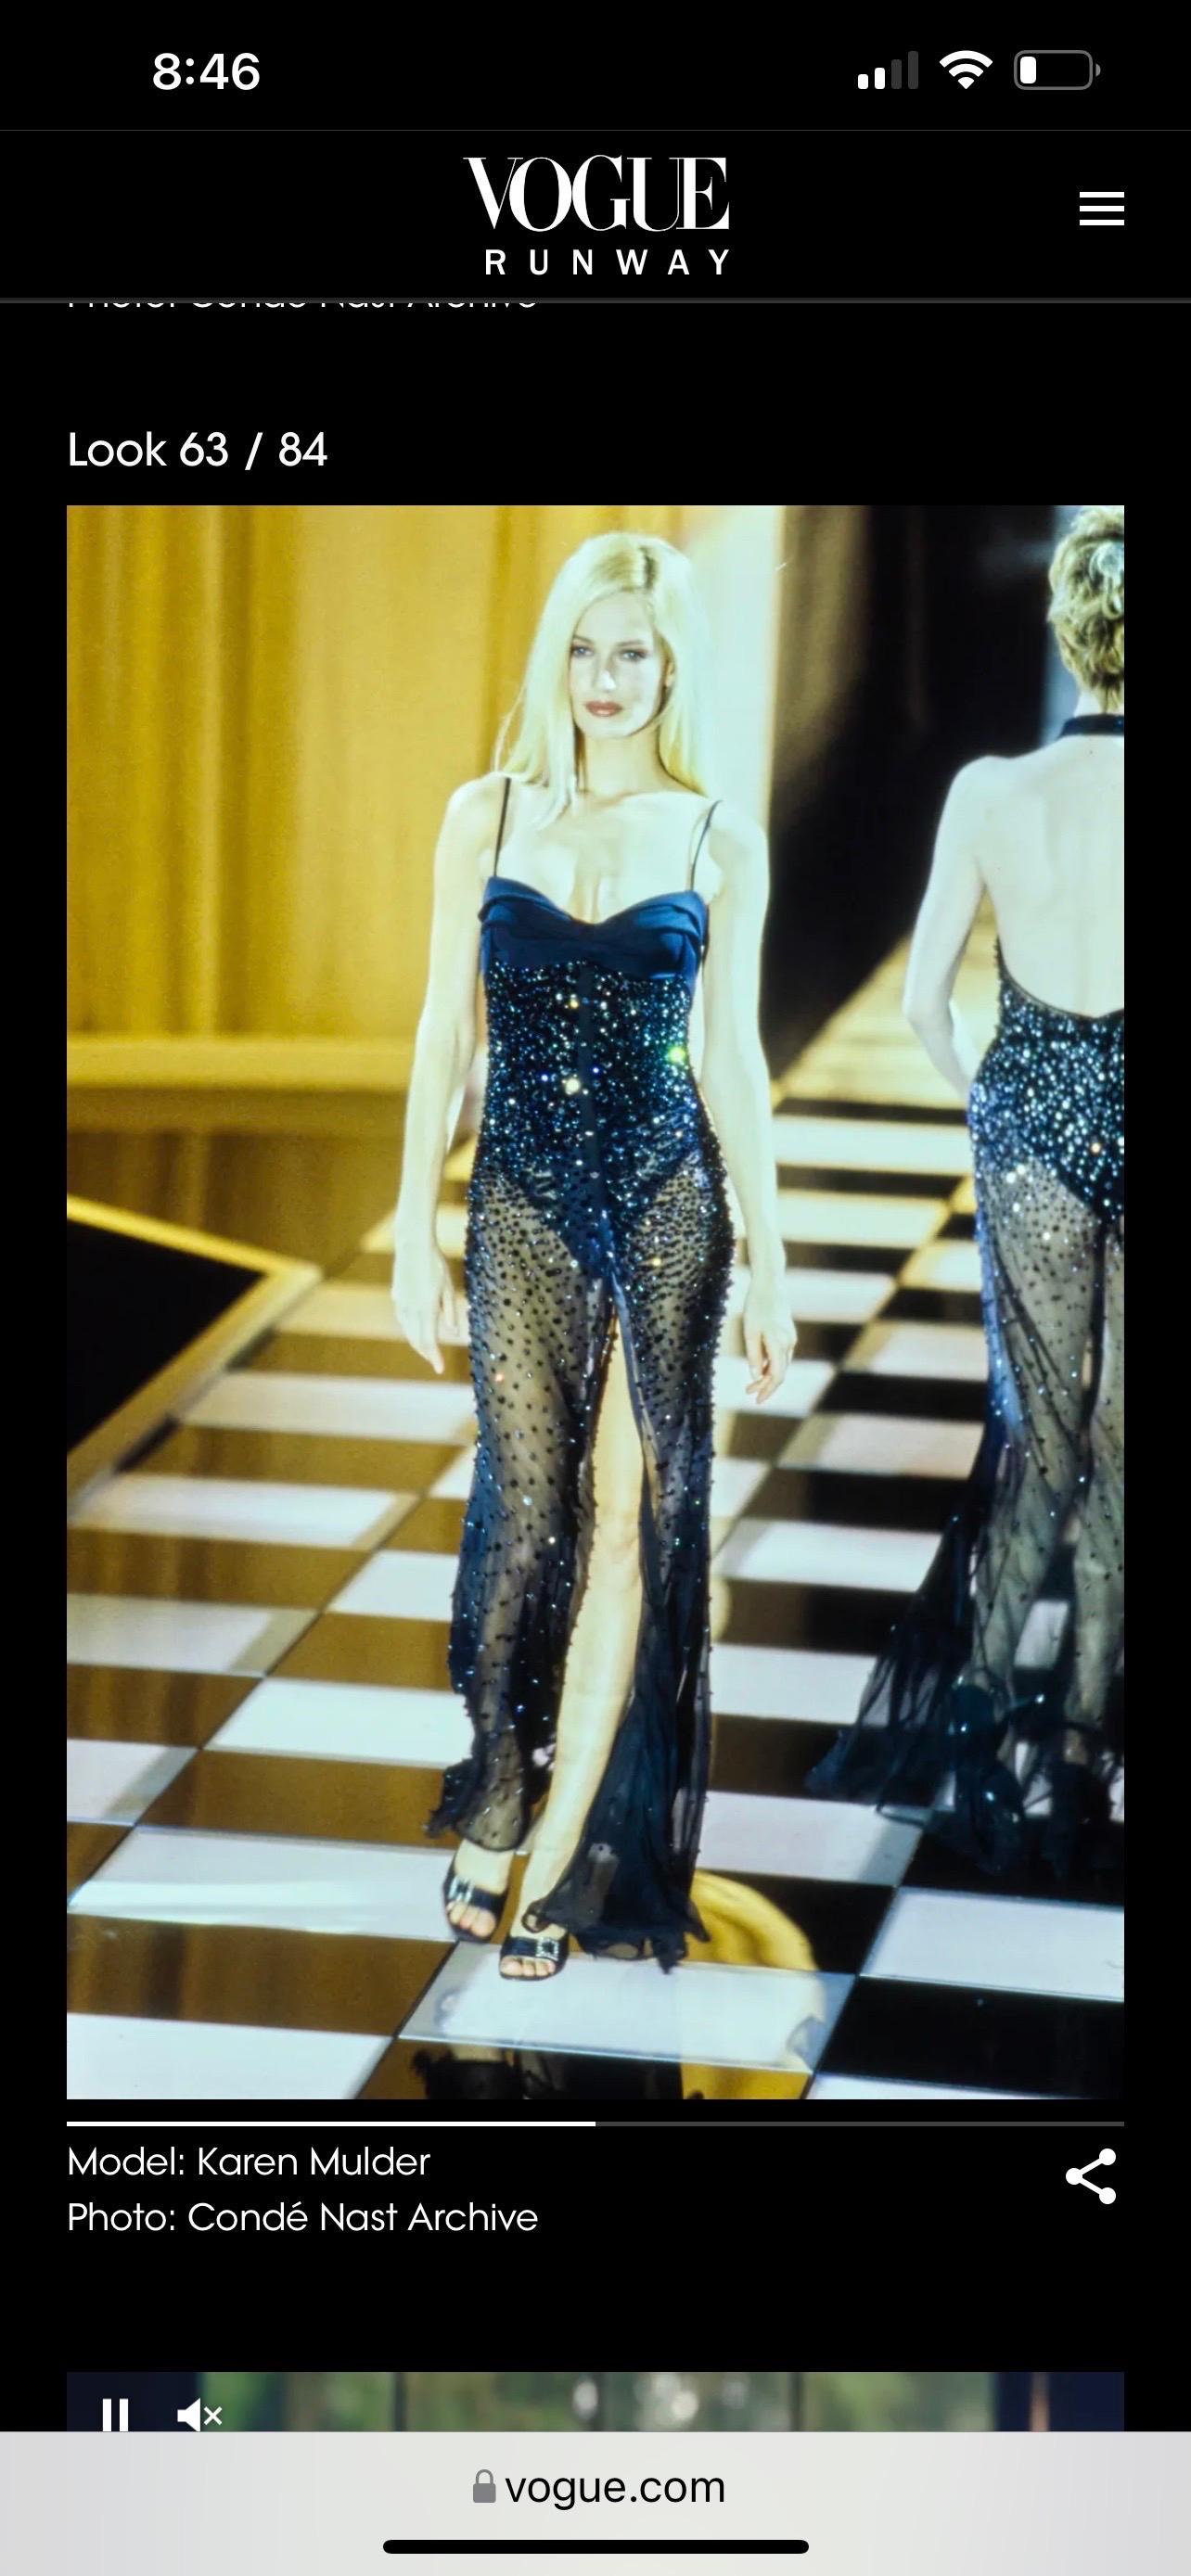 Gianni Versace S/S 1996 Runway Embellished Bustier Black Evening Dress Gown  For Sale 7